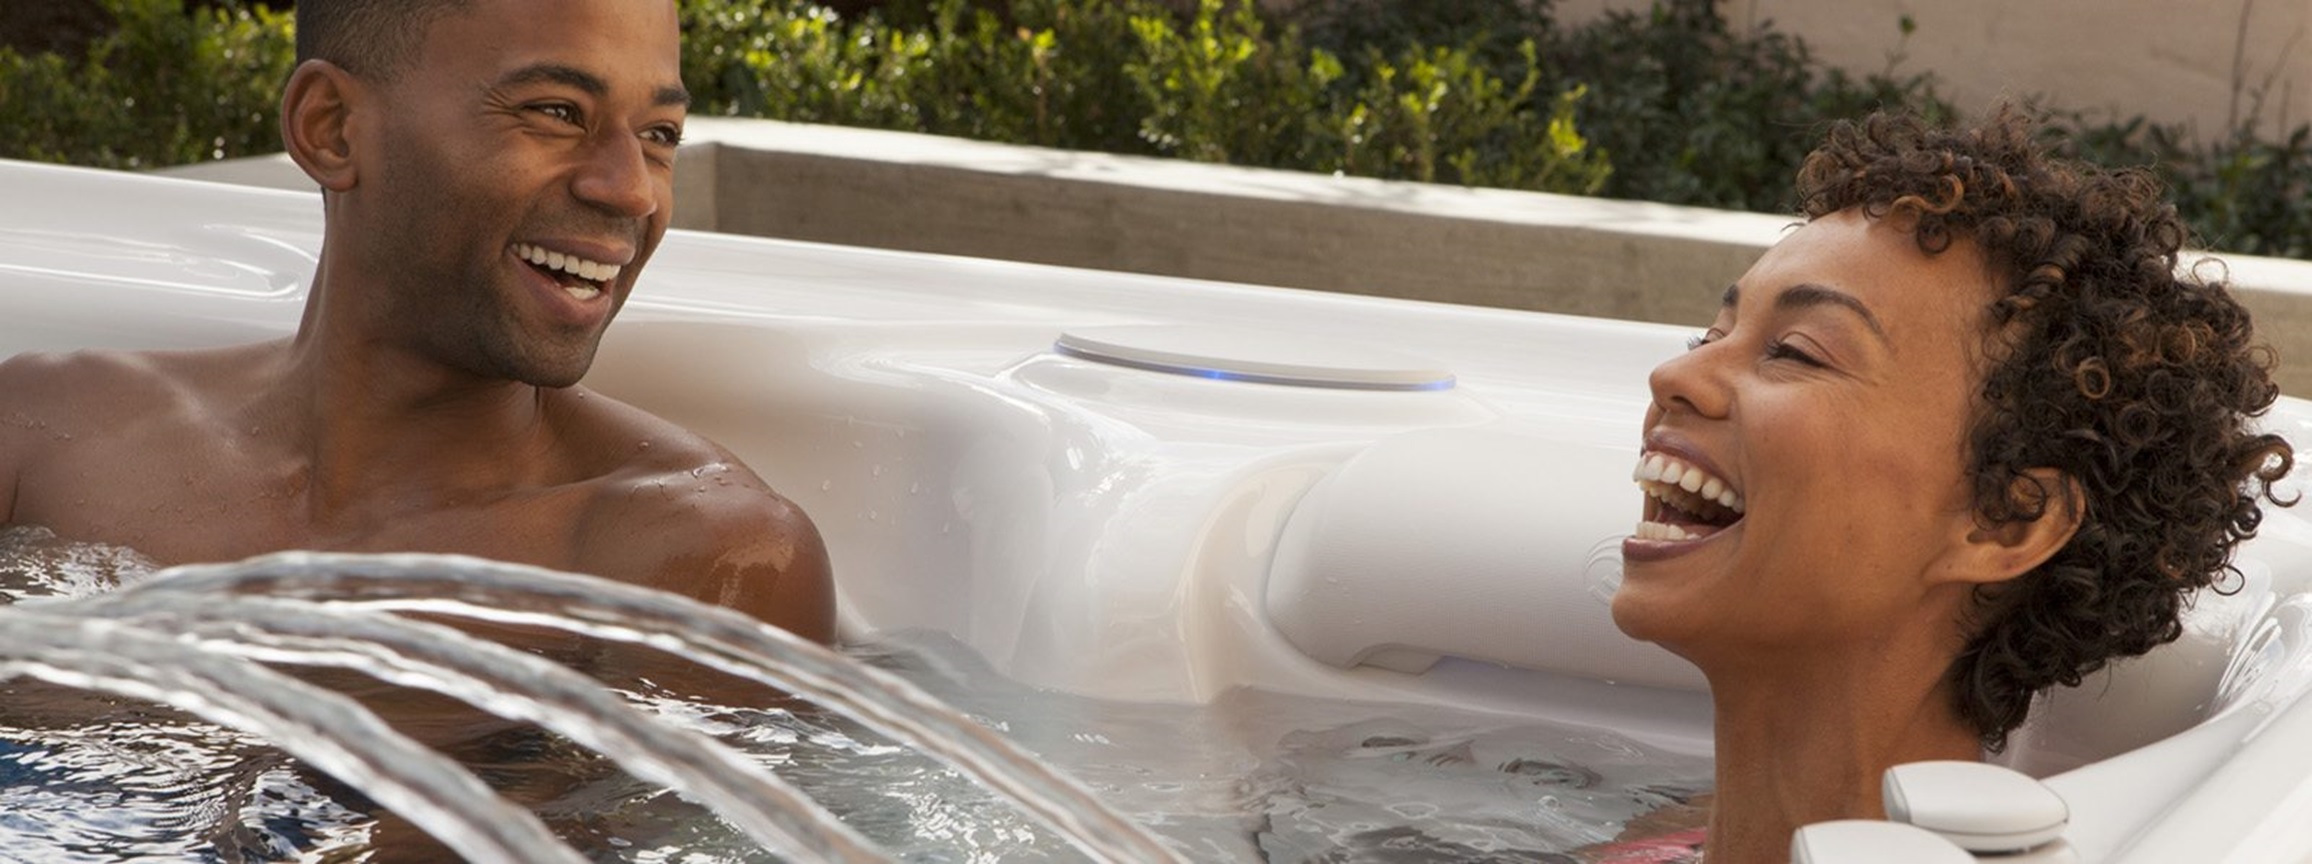 How is Hot Tub Maintenance Different in the Wintertime?